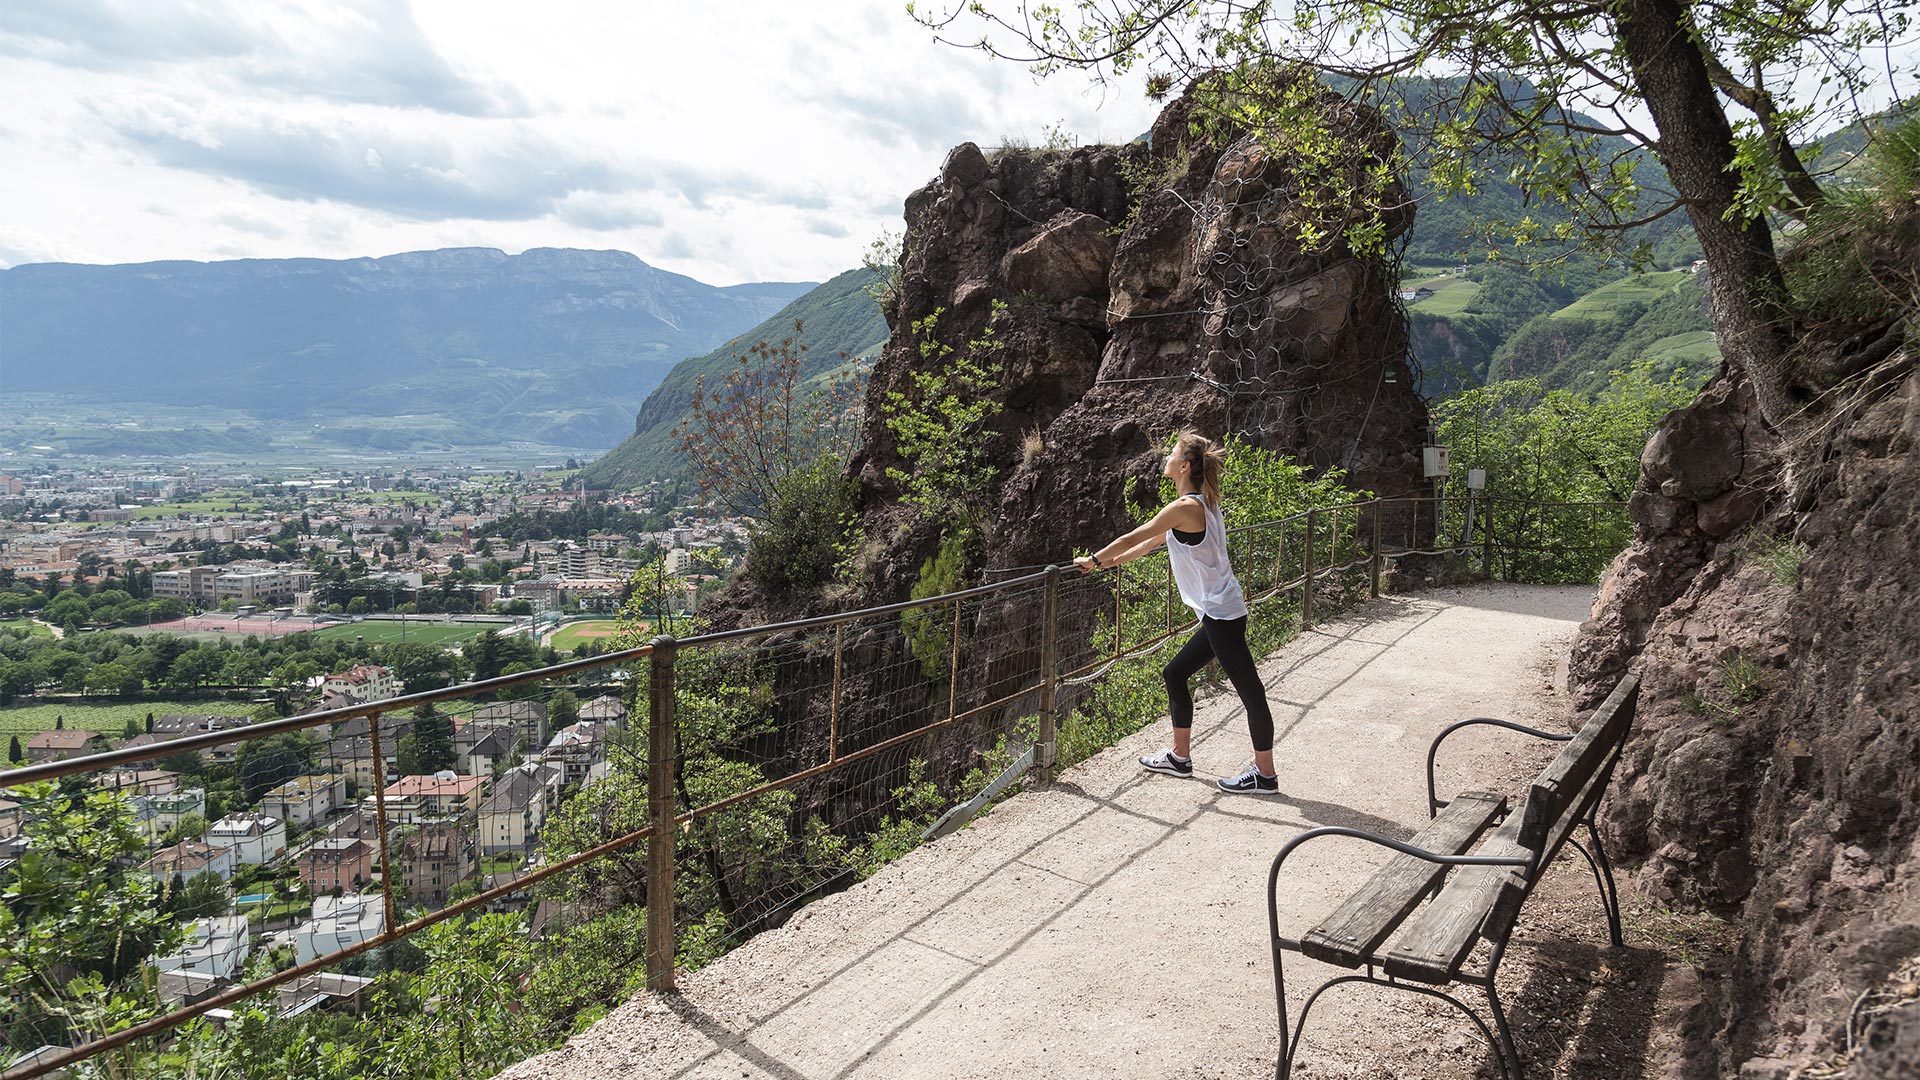 On an afternoon in Bolzano, a young girl rests along the Sant'Osvaldo climb after running in the open air.